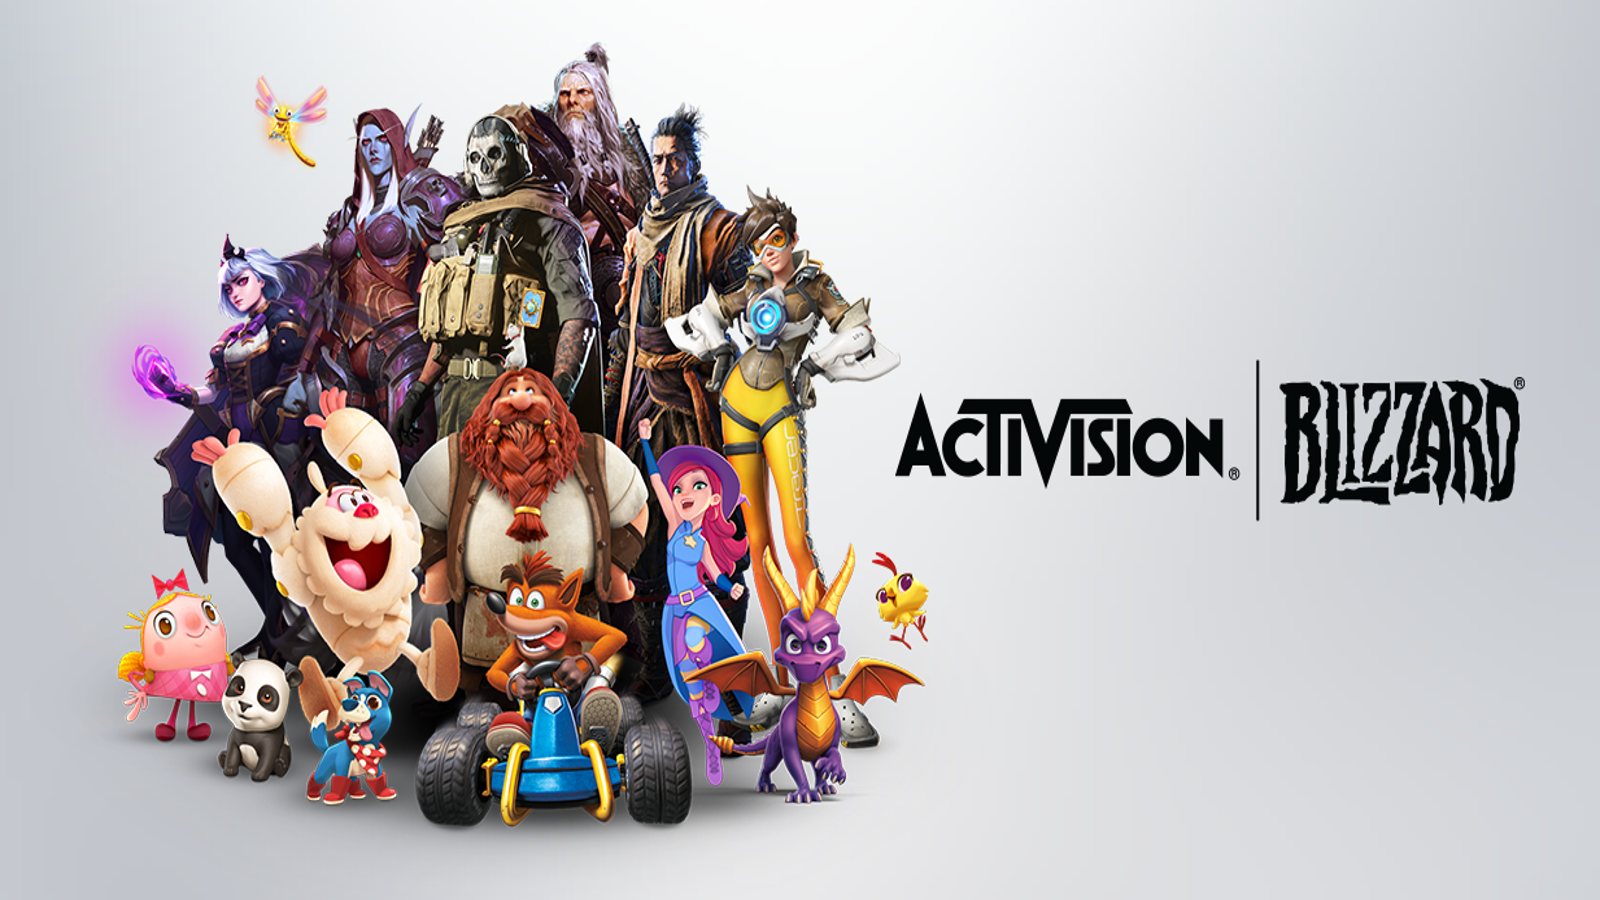 CMA blocks Microsoft/Activision Blizzard - Global Competition Review